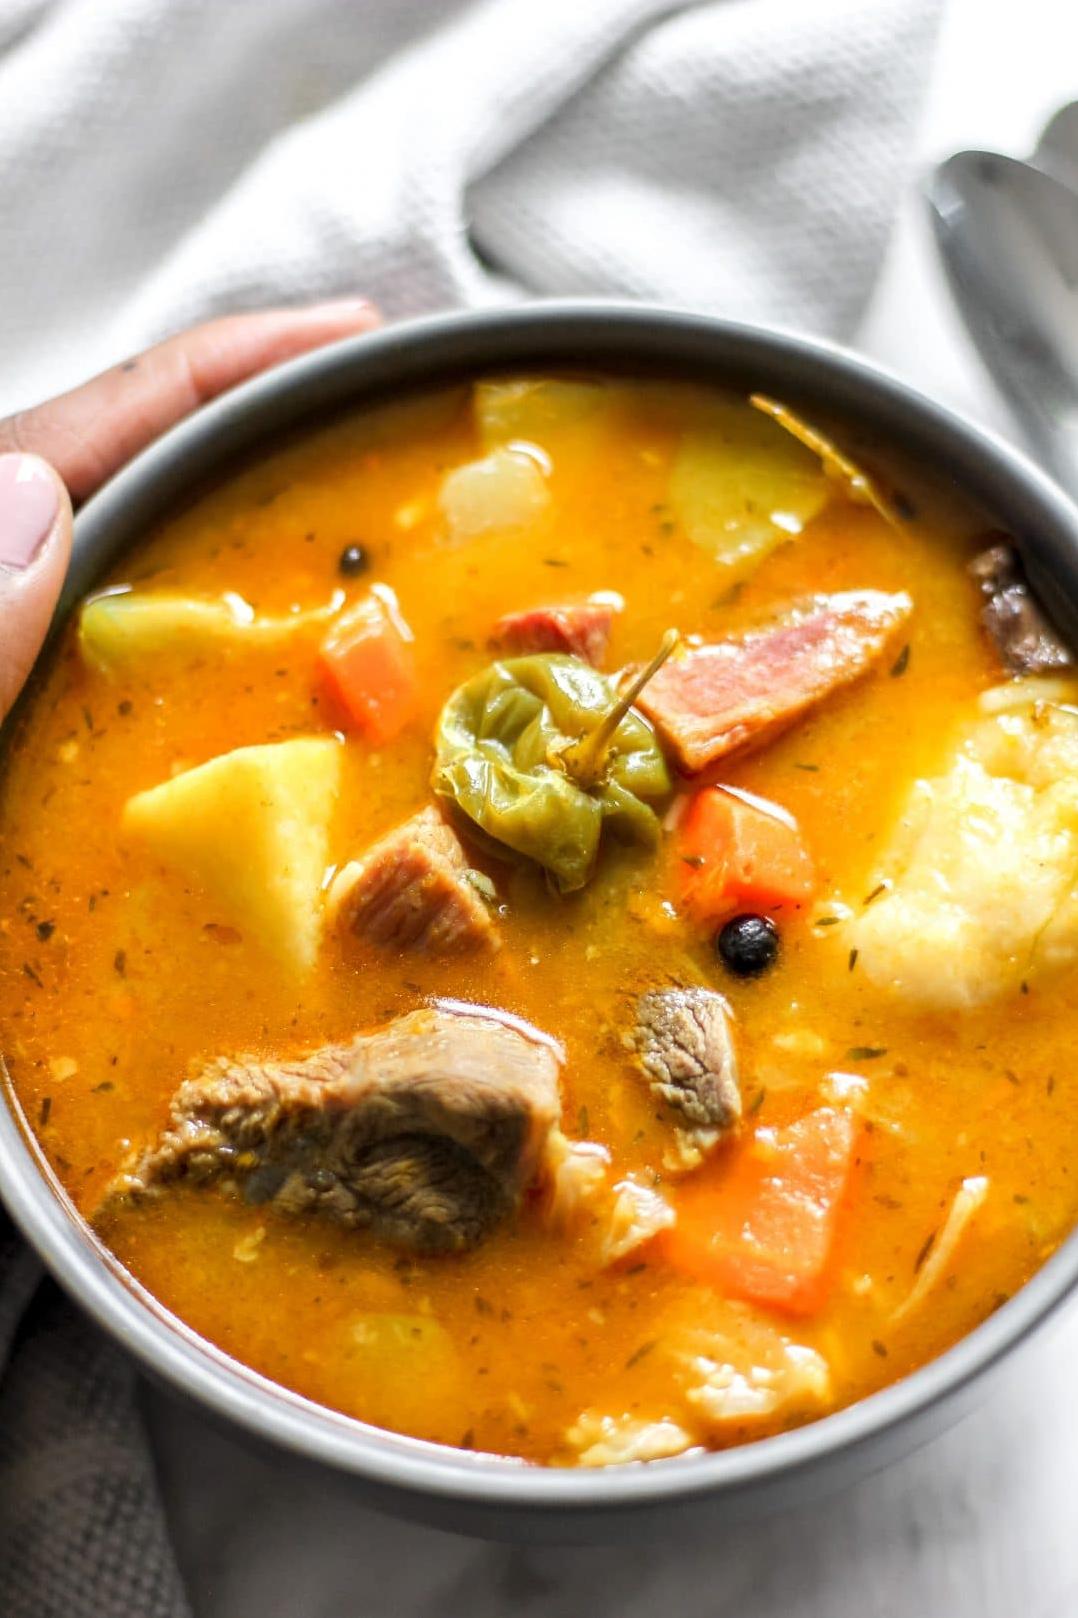  Let your crockpot do the work and enjoy the flavorful aroma of this soup in your kitchen